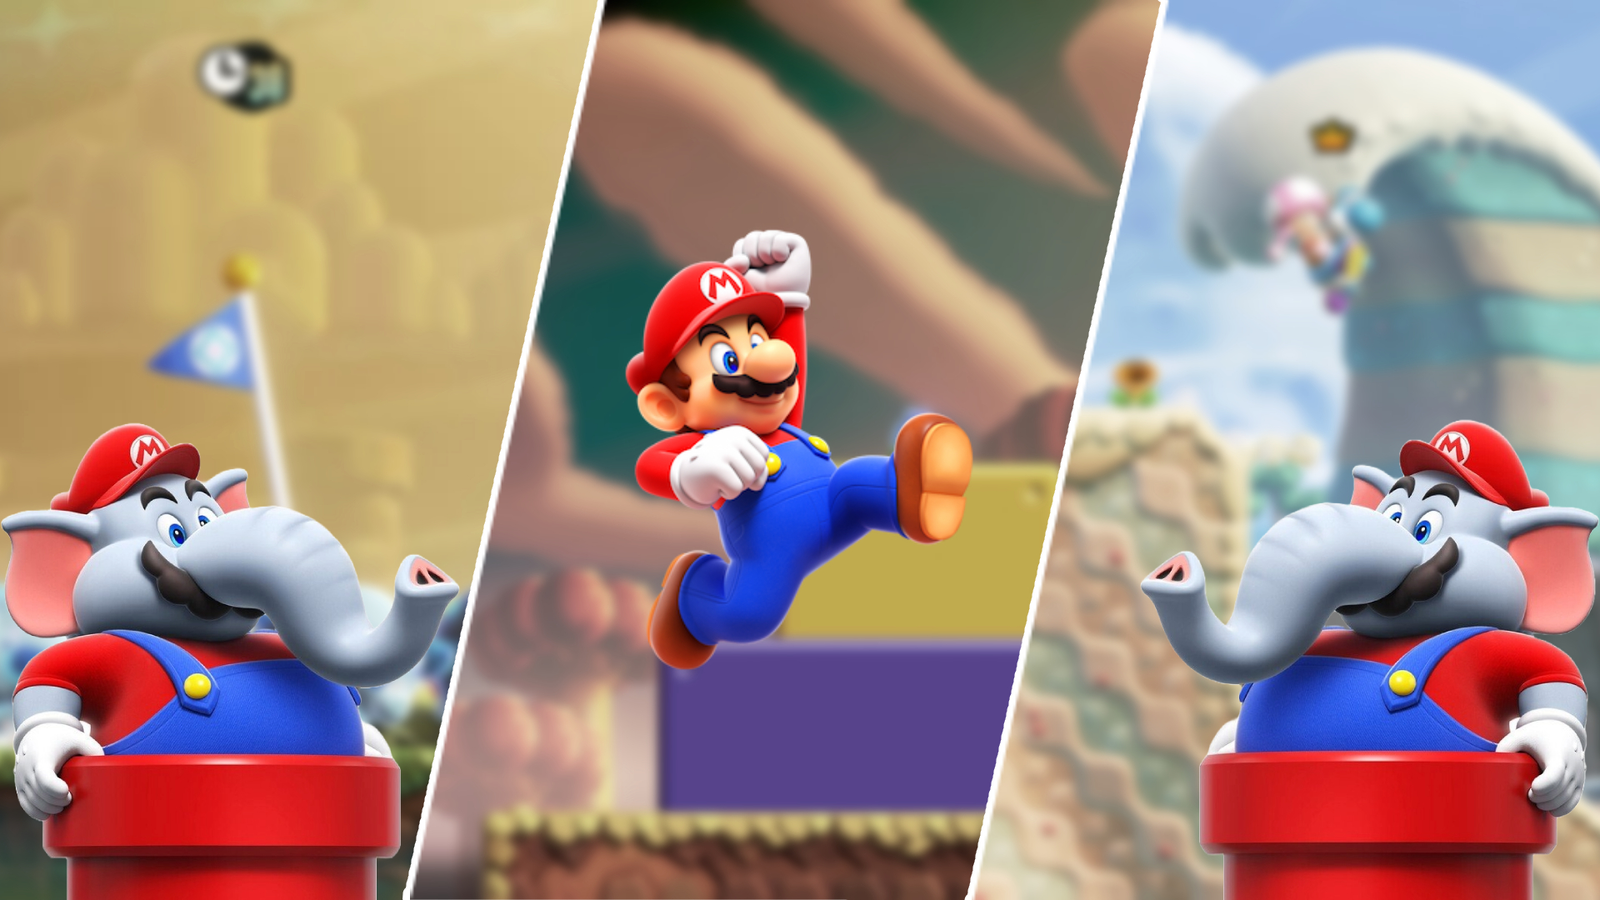 Super Mario Bros. Wonder Bringing Back 2012 Character, But With a Twist